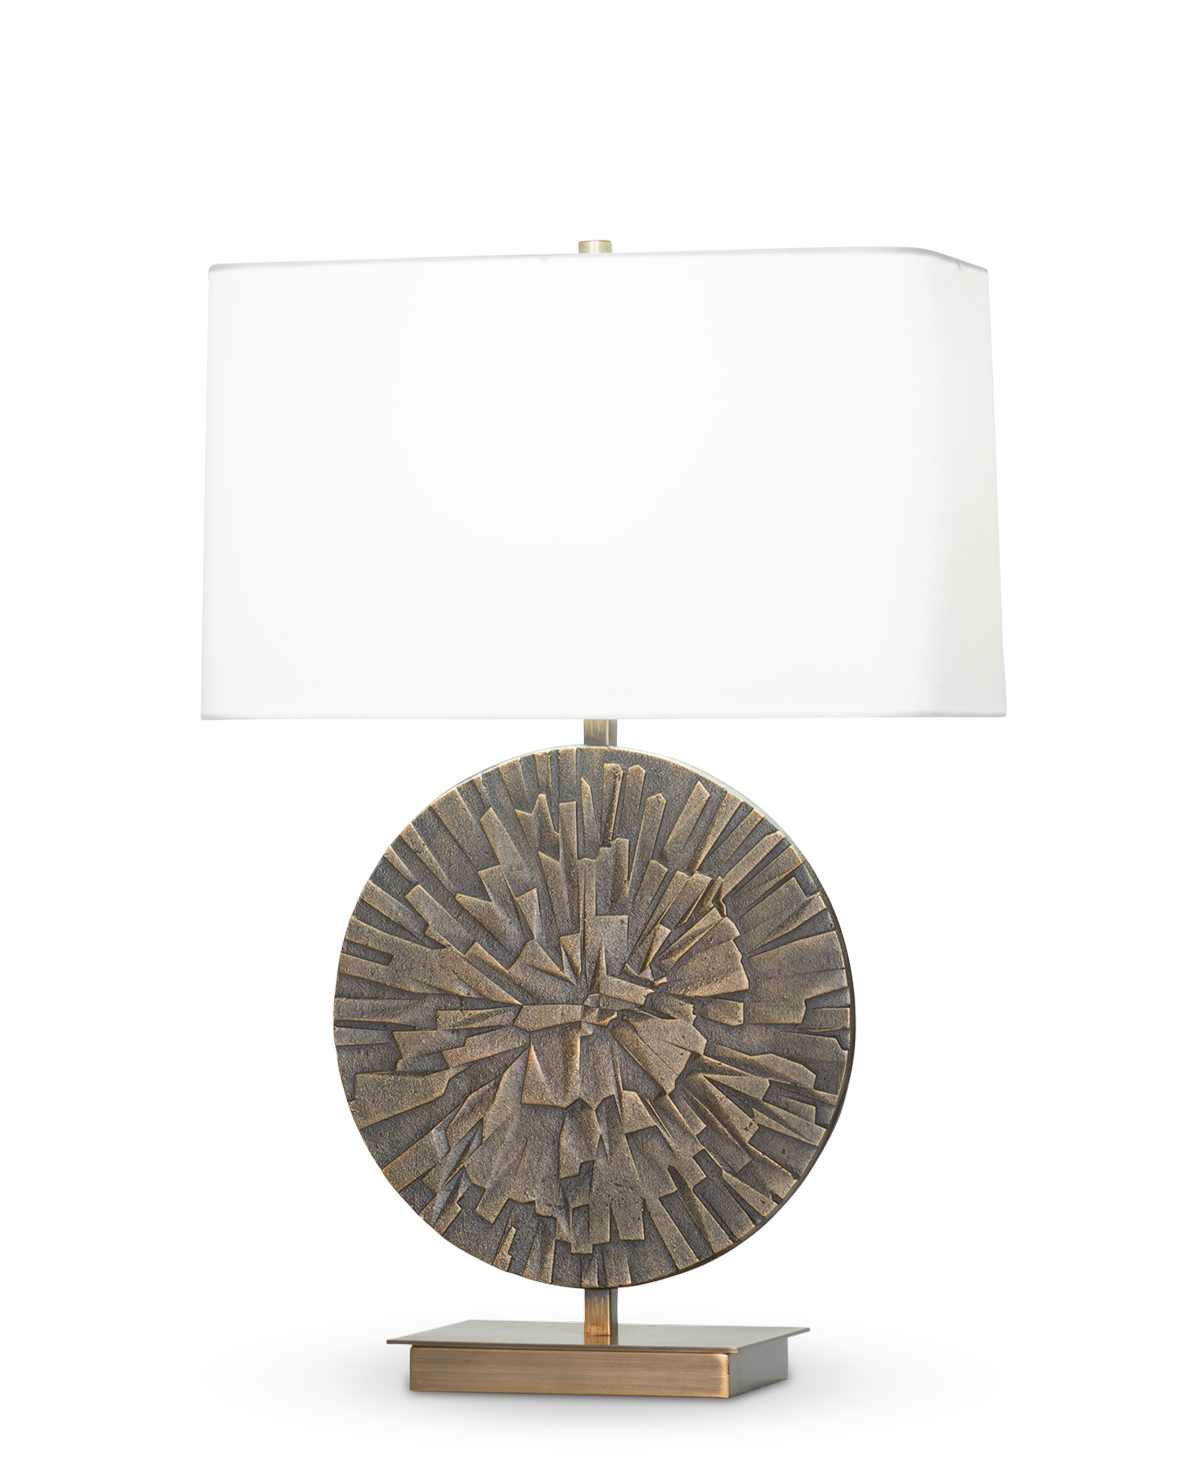 FlowDecor Rory Table Lamp in metal with antique brass finish and off-white cotton rounded rectangle shade (# 4441)